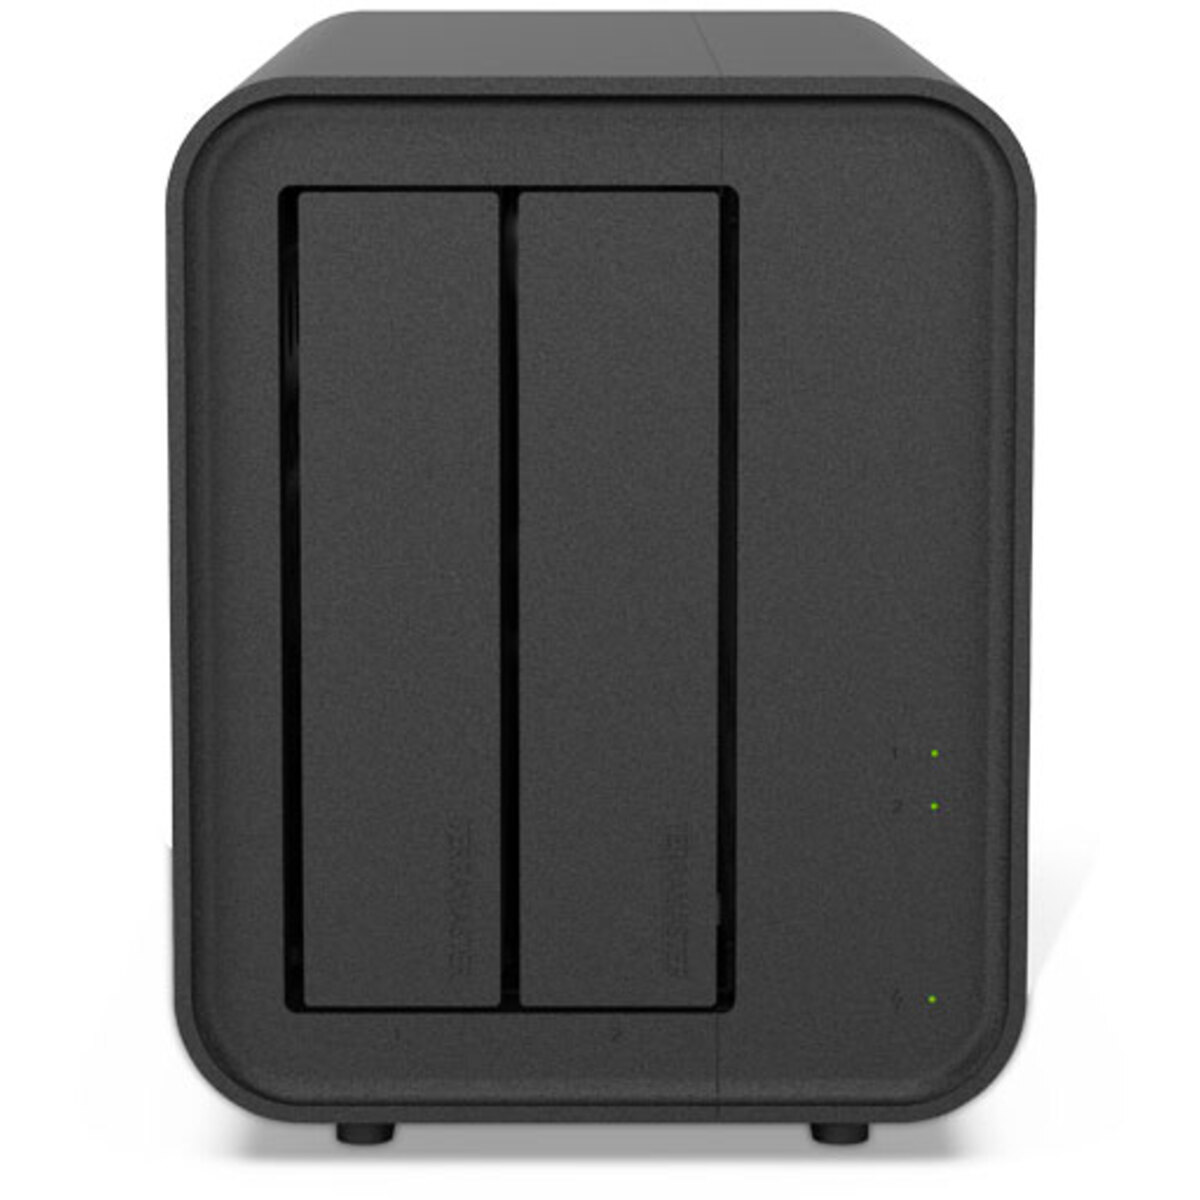 TerraMaster D5 Hybrid 16tb 2-Bay Desktop Multimedia / Power User / Business DAS - Direct Attached Storage Device 1x16tb Seagate IronWolf Pro ST16000NT001 3.5 7200rpm SATA 6Gb/s HDD NAS Class Drives Installed - Burn-In Tested - ON SALE D5 Hybrid